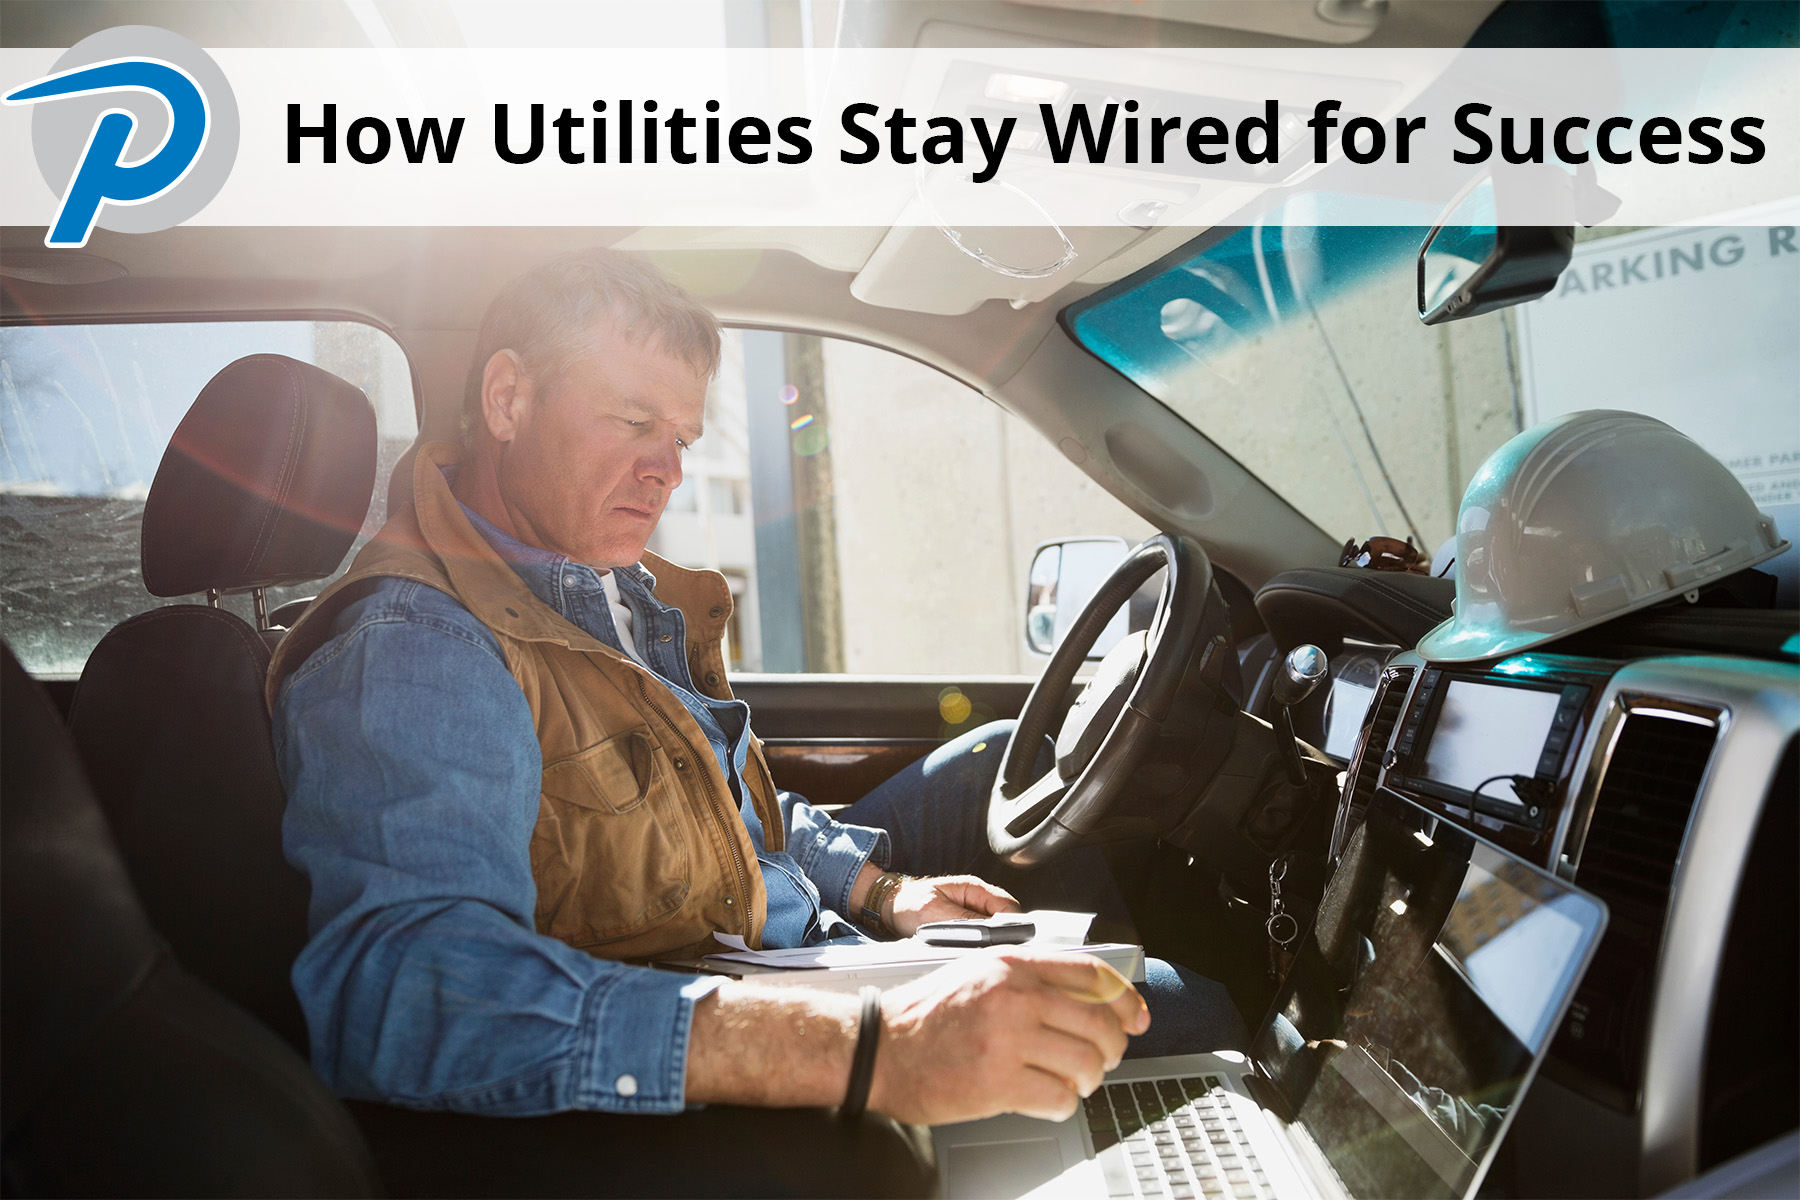 How Utilities Stay Wired for Success